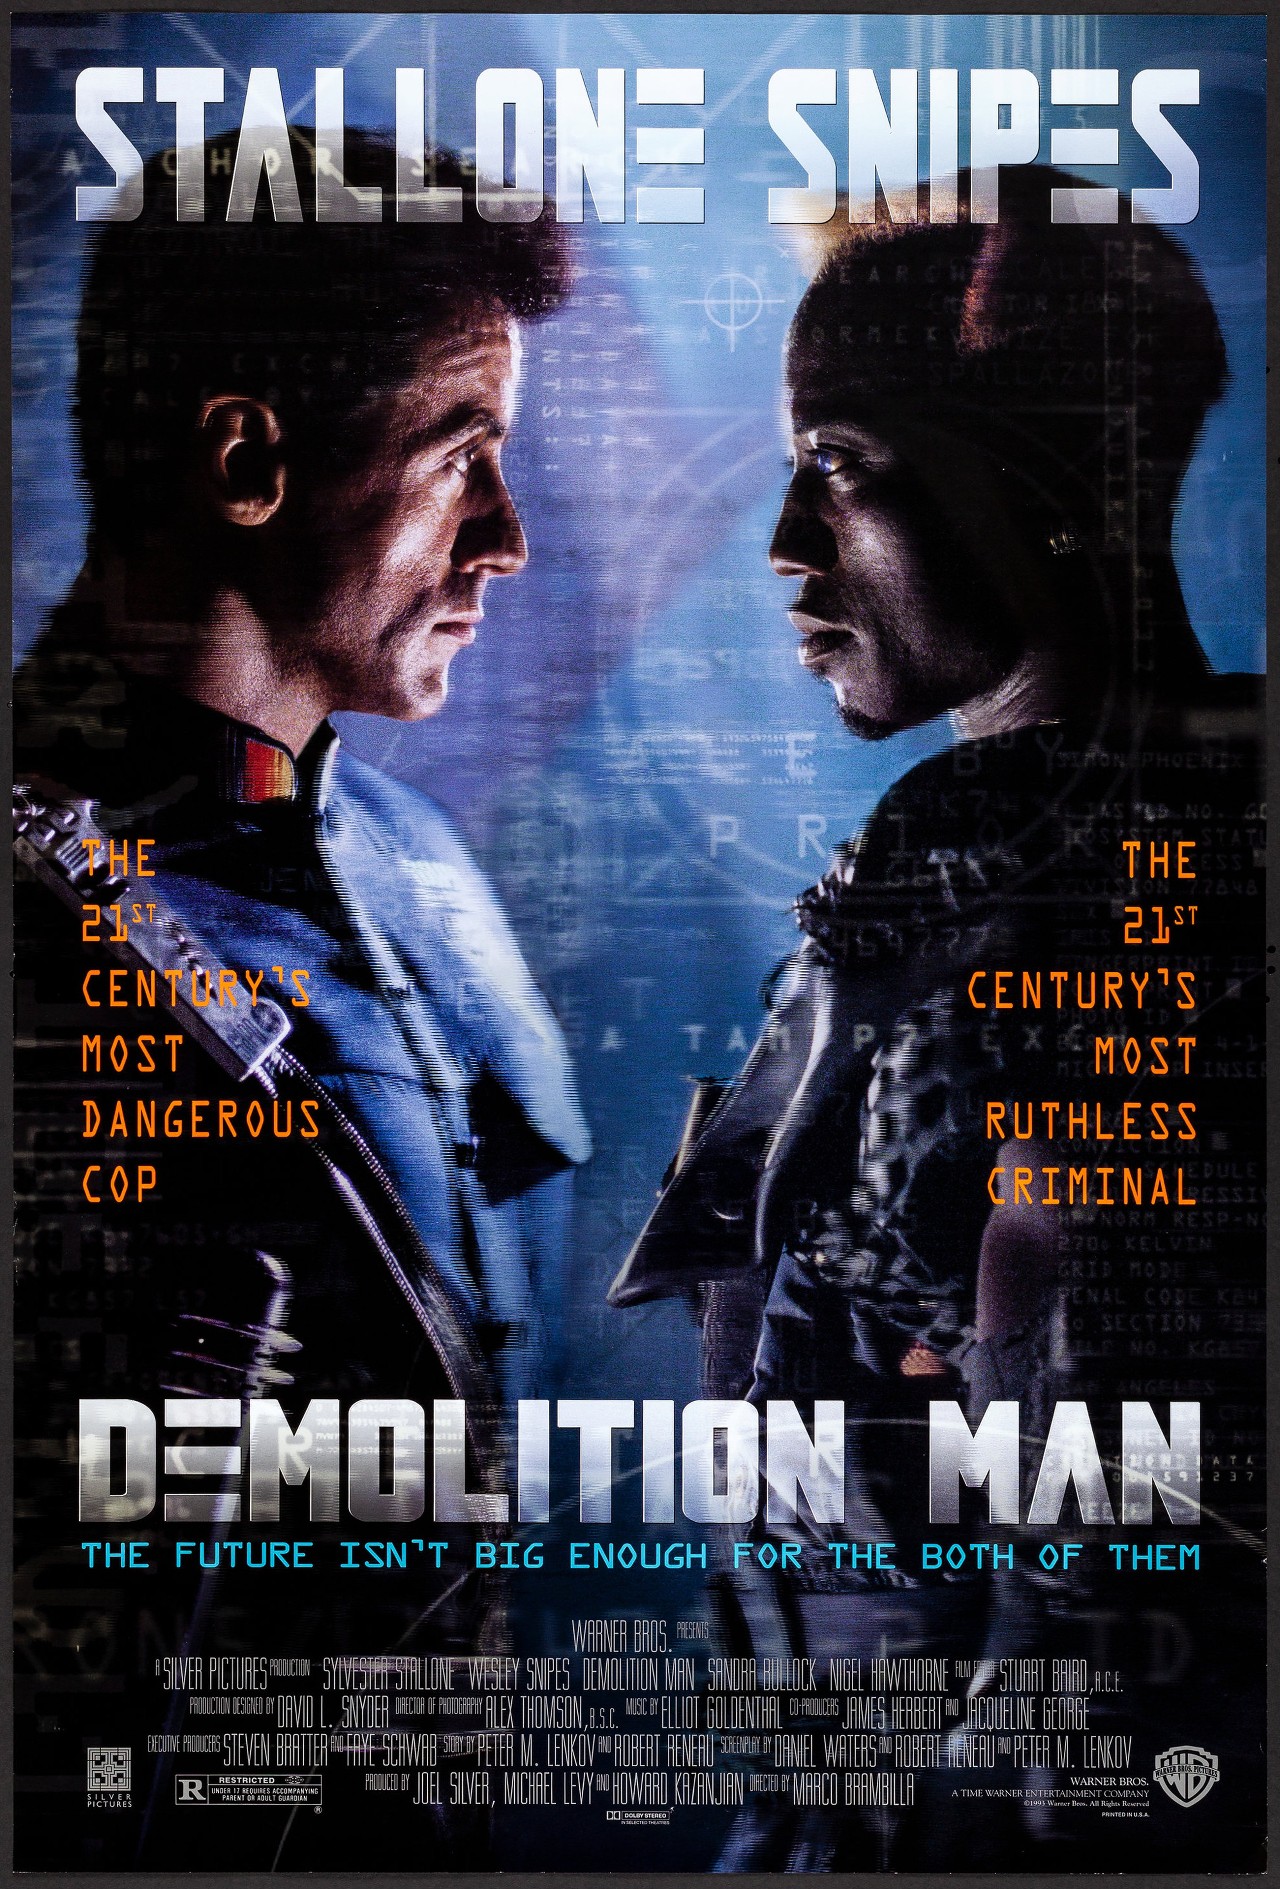 Demolition Man Poster John Spartan Sylvester Stallone The 21st Century's Most Dangerous Cop Wesley Snipes Simon Phoenix The 21st Century's Most Ruthless Criminal The Future Isn't Big Enough For The Both Of Them